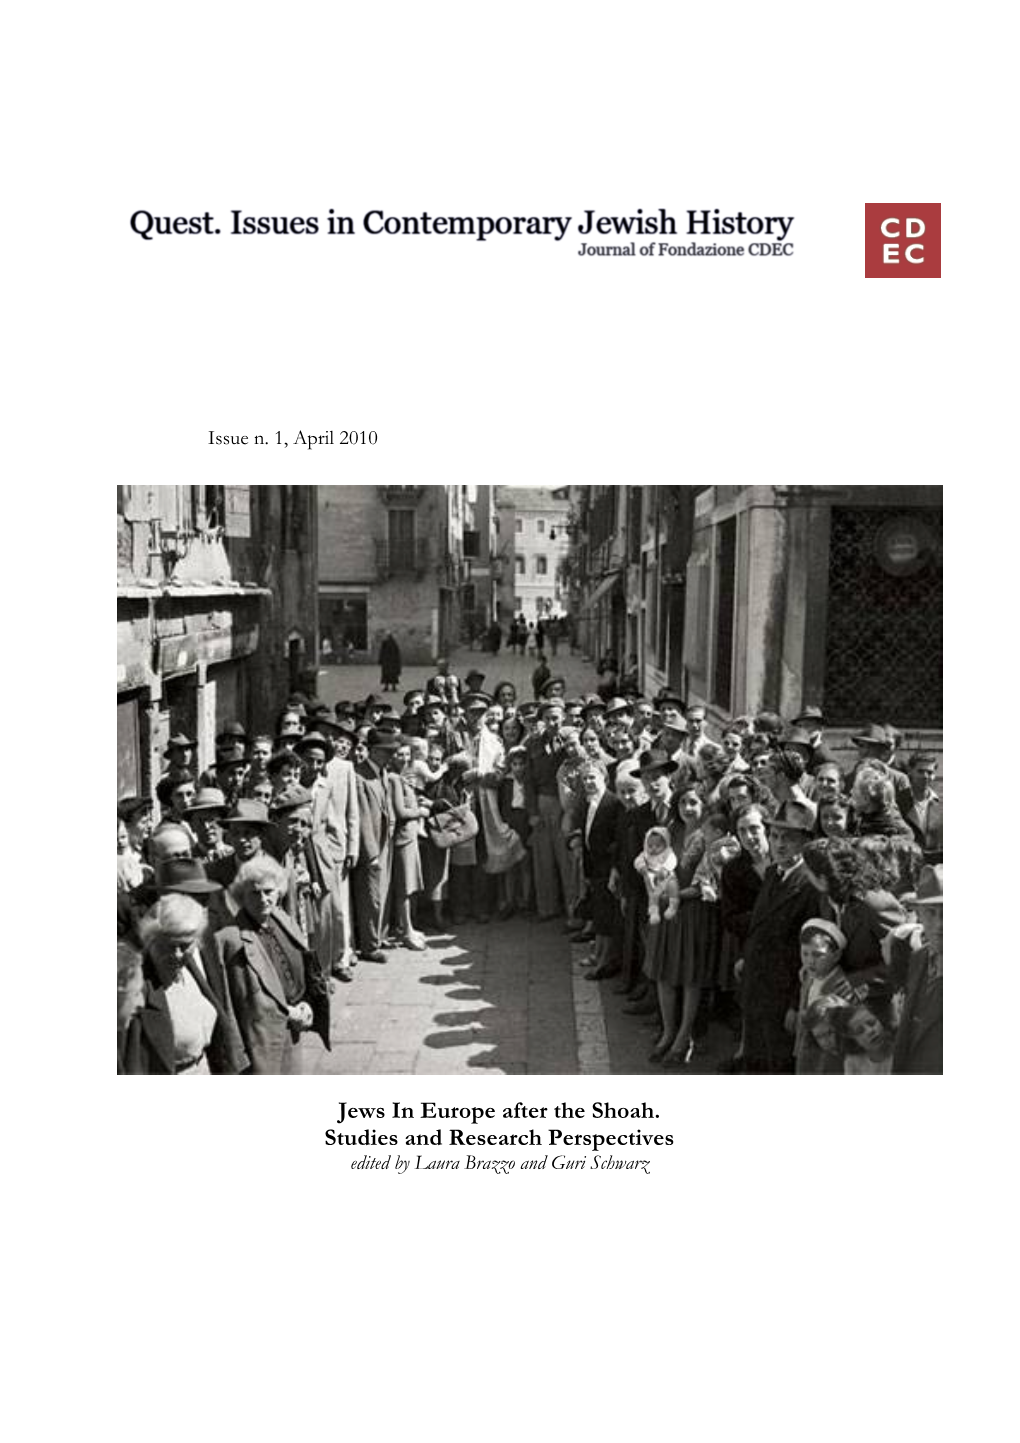 Jews in Europe After the Shoah. Studies and Research Perspectives Edited by Laura Brazzo and Guri Schwarz FOCUS